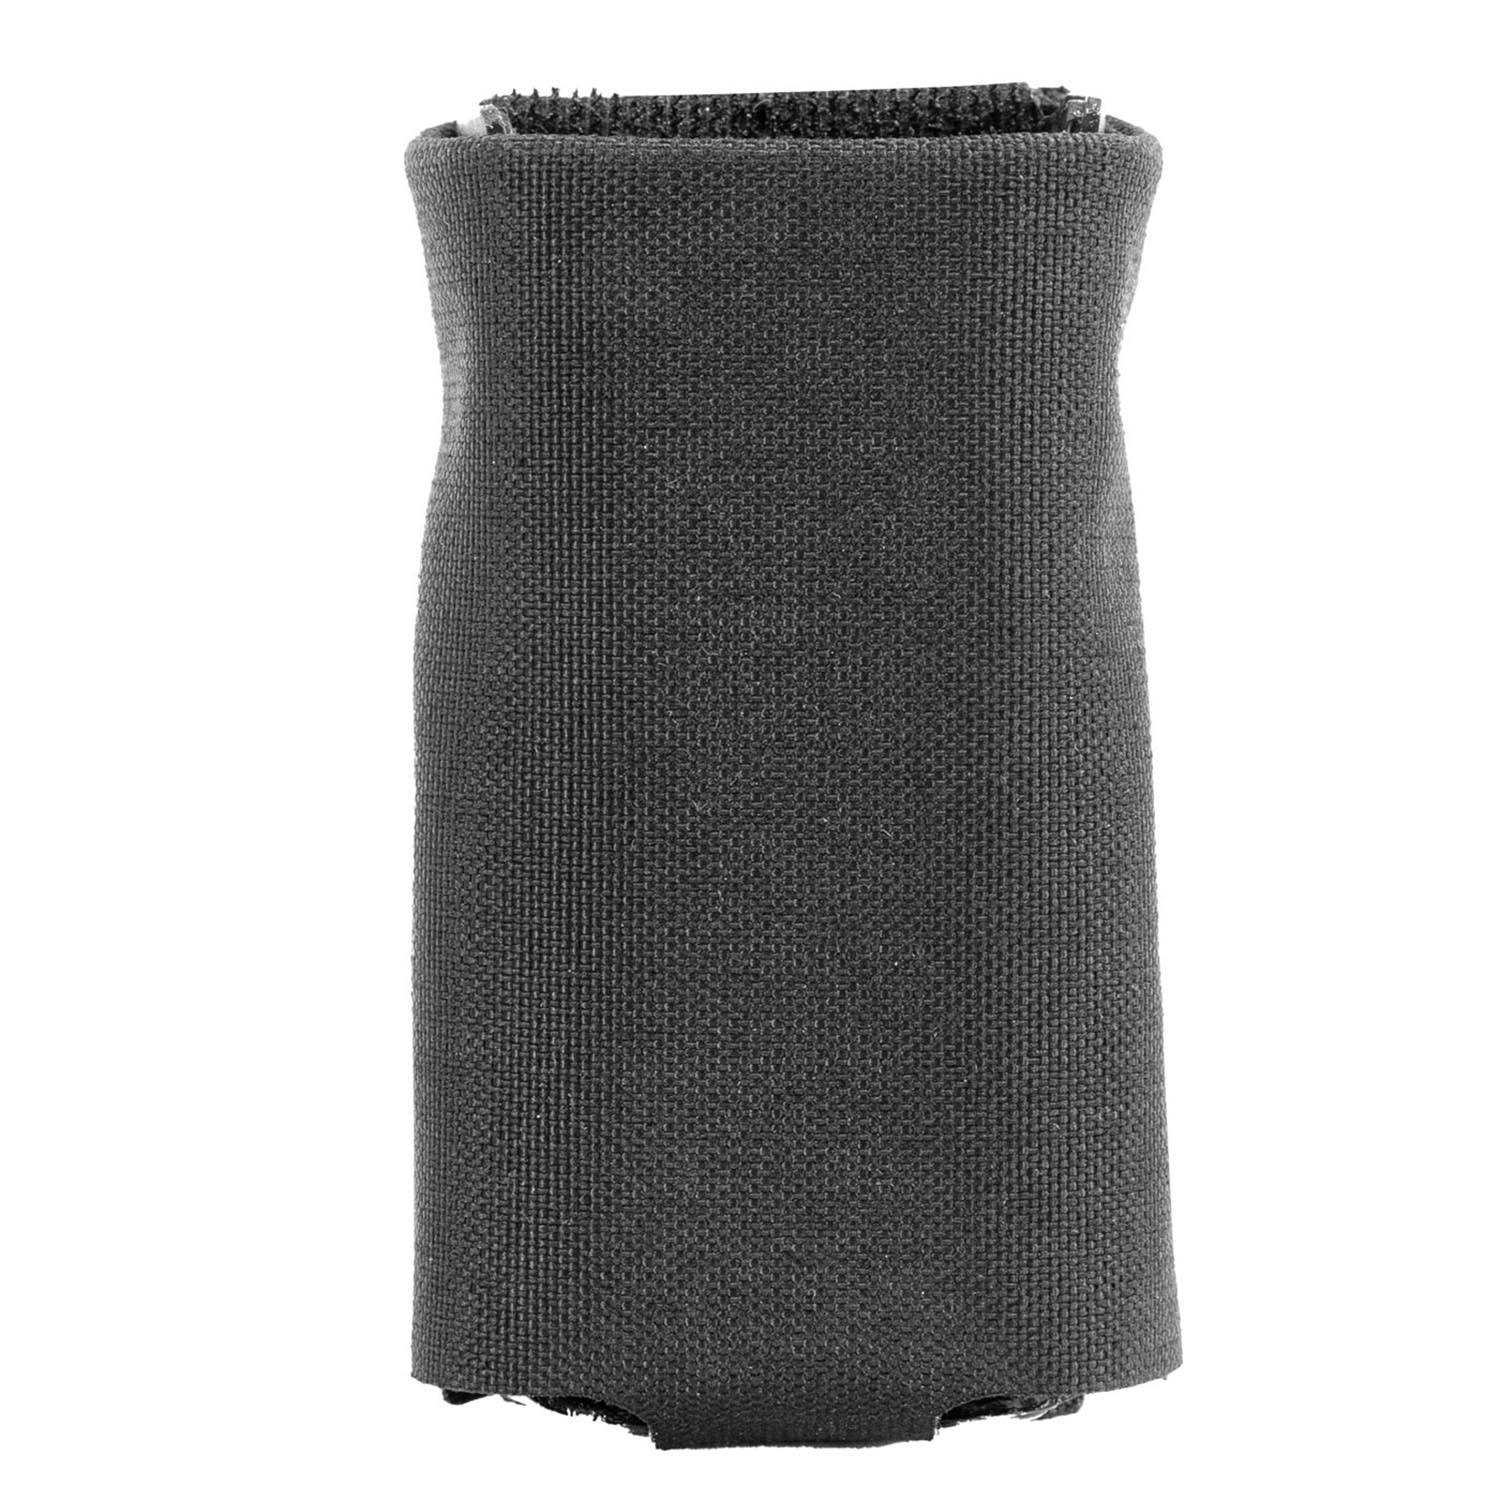 POINT BLANK SINGLE PISTOL MAG POUCH